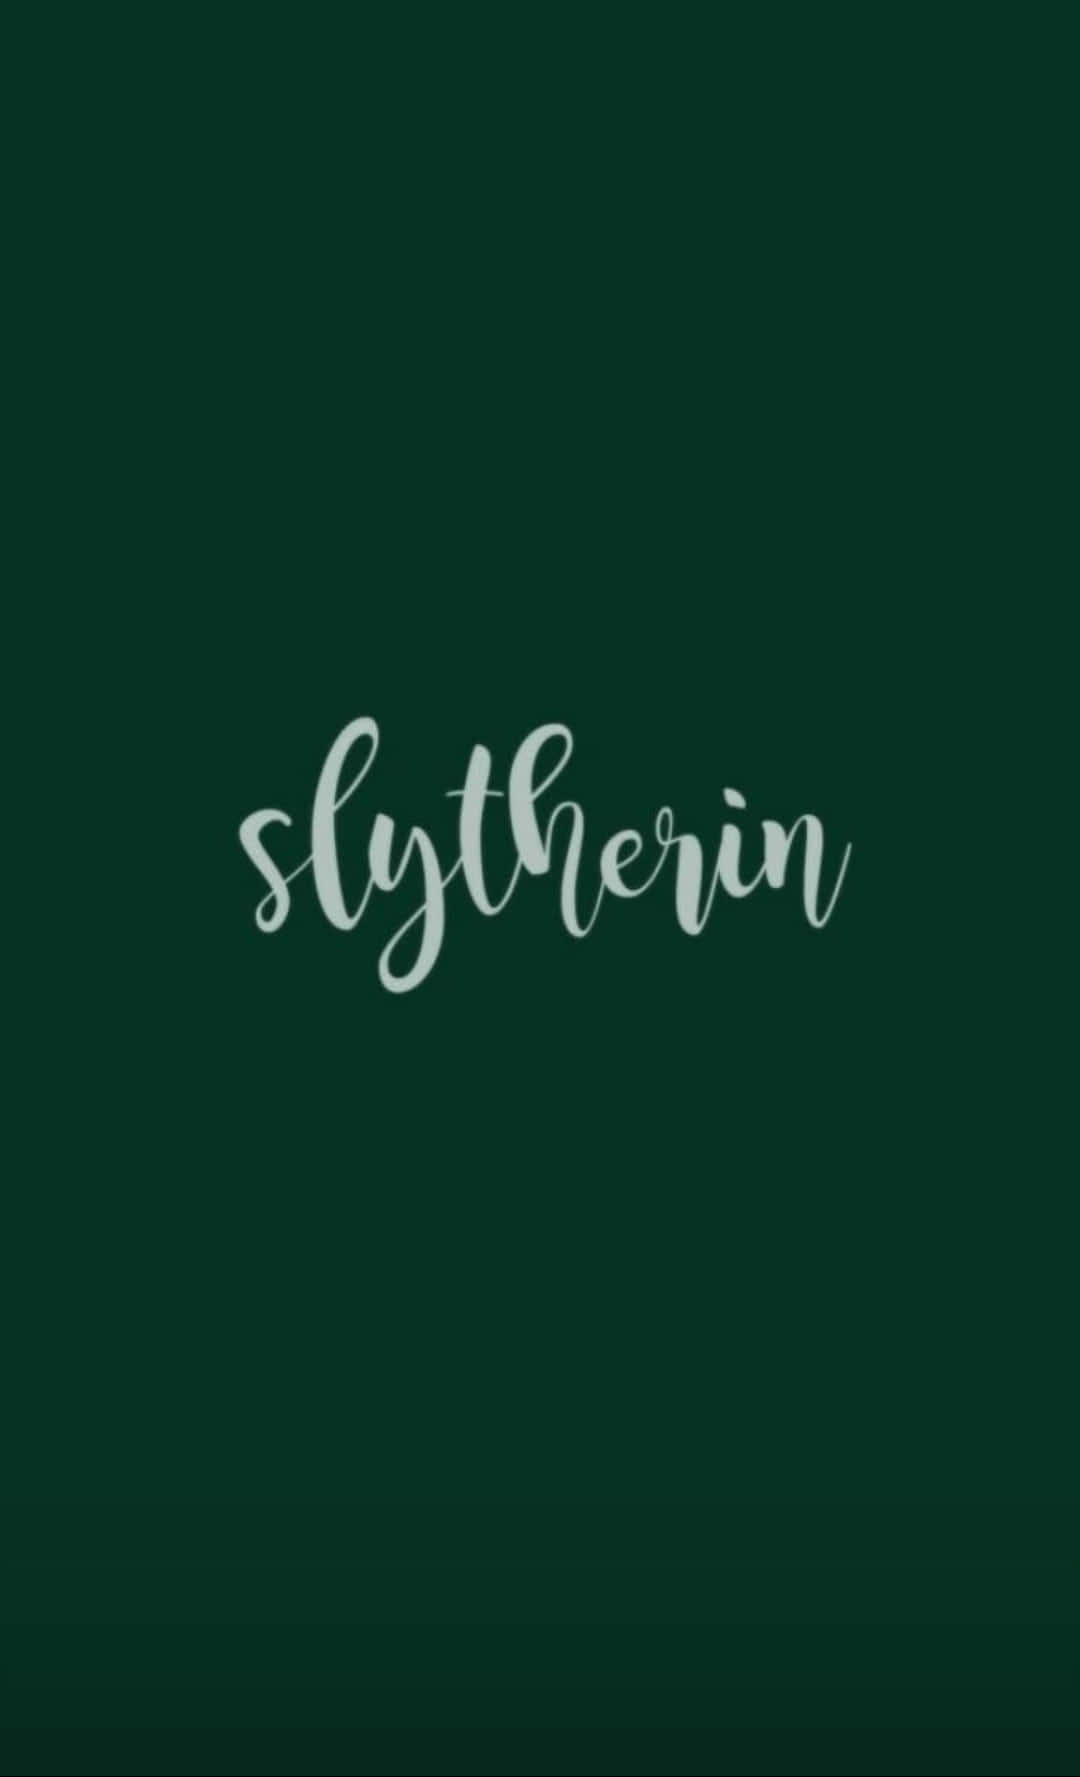 Step into Slytherin for a magical journey!